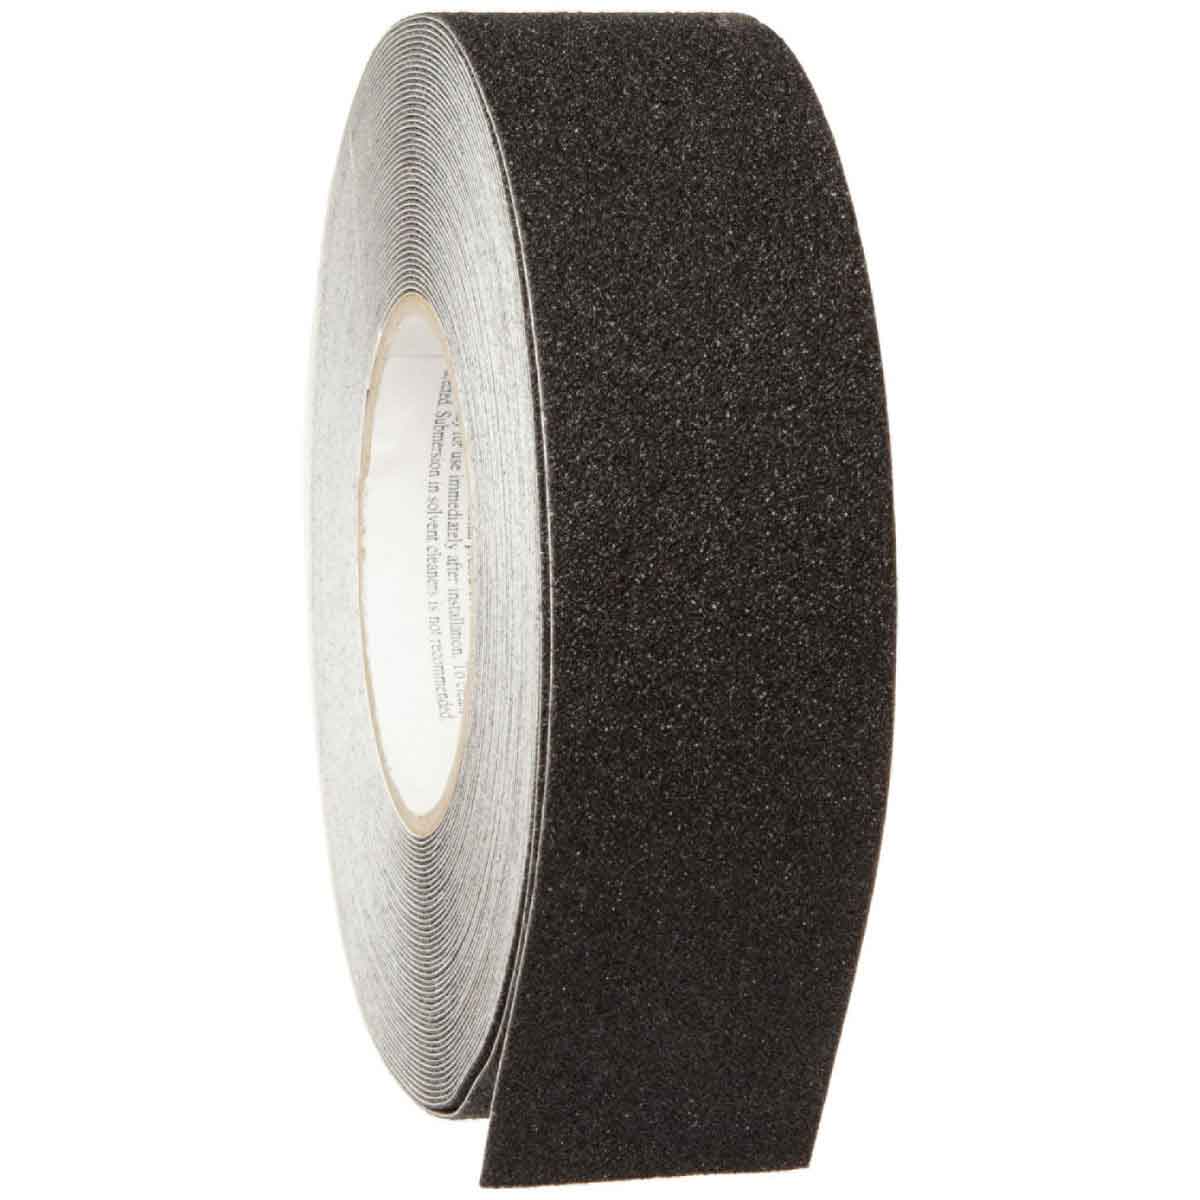 Brady® 78189 Blank Laminated Non-Reflective Roll Mounted Anti-Skid Tape, 60 ft L x 1 in W x 0.026 in THK, B-916 Polyester, Solid Surface Pattern, Gritted Surface